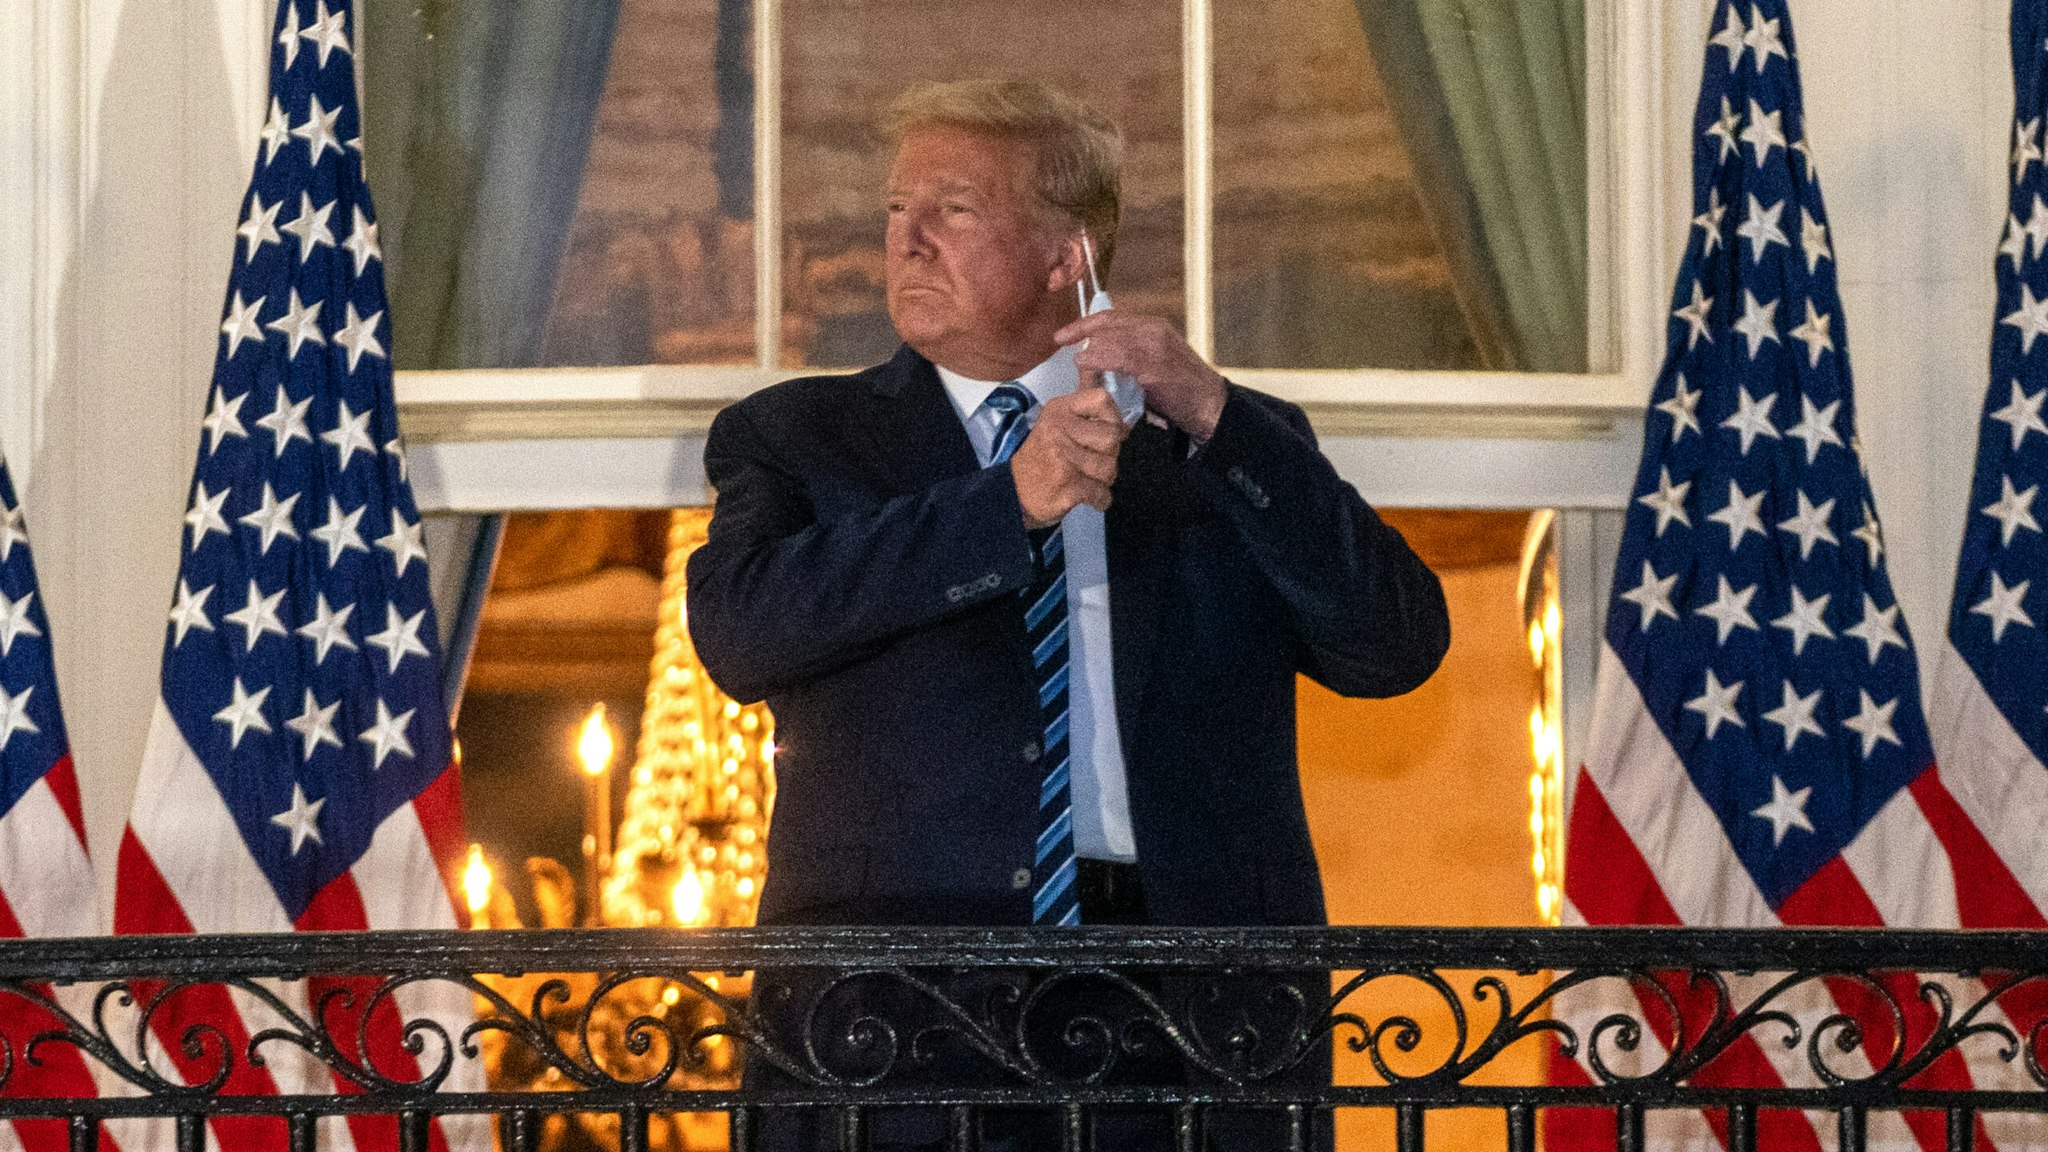 U.S. President Donald Trump removes his protective mask on the Truman Balcony of the White House in Washington, D.C., U.S., on Monday, Oct. 5, 2020. Trump's aides will try to keep him confined to the White House residence after being discharged from the hospital with Covid-19 but are unsure they can limit his movements.